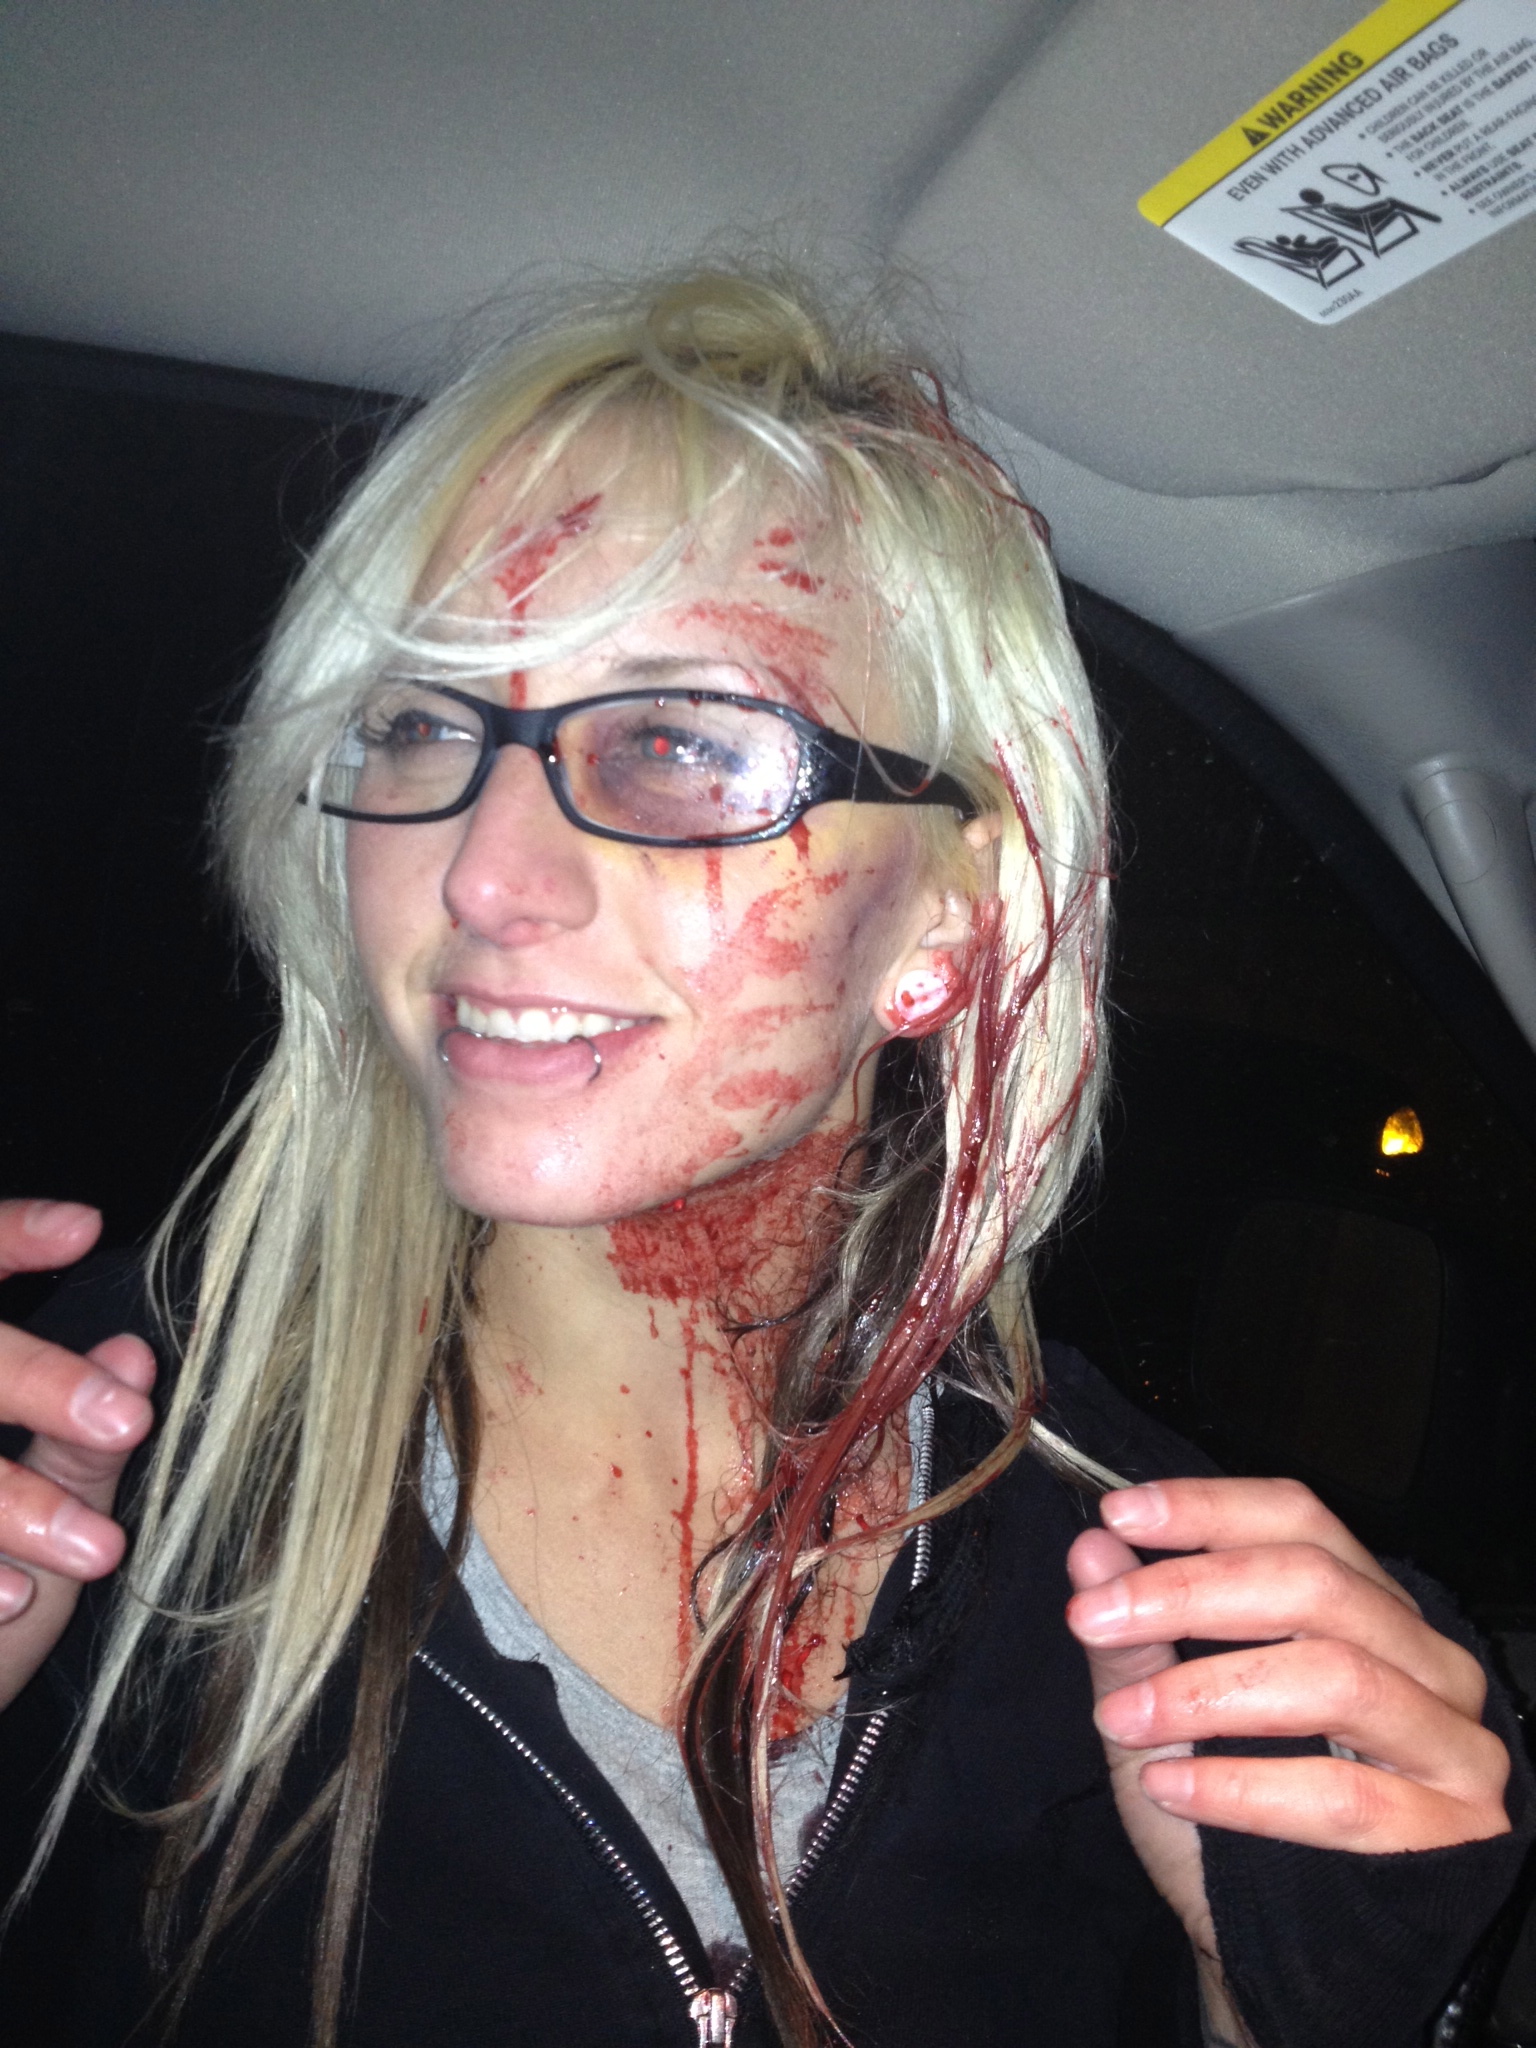 Our Lead actress on her final night of Shooting. A great talent and a Hard worker Very glad she was apart of the team.